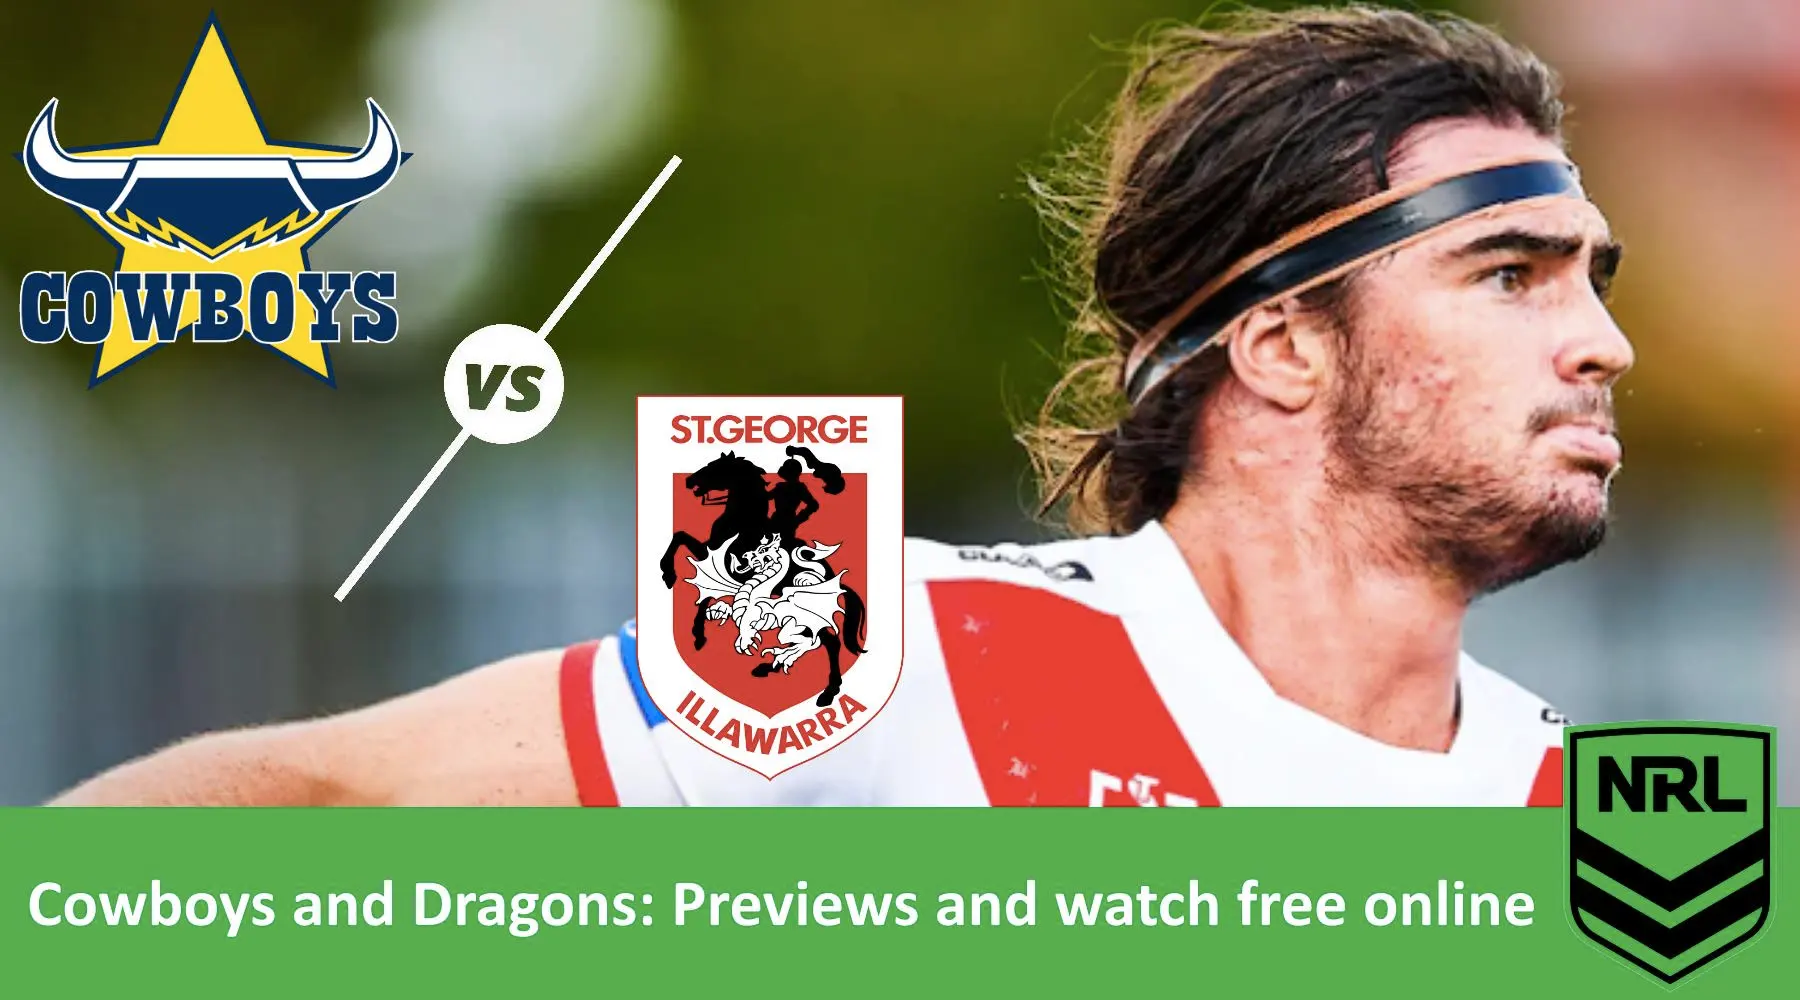 How to watch Cowboys vs Dragons NRL live and match preview